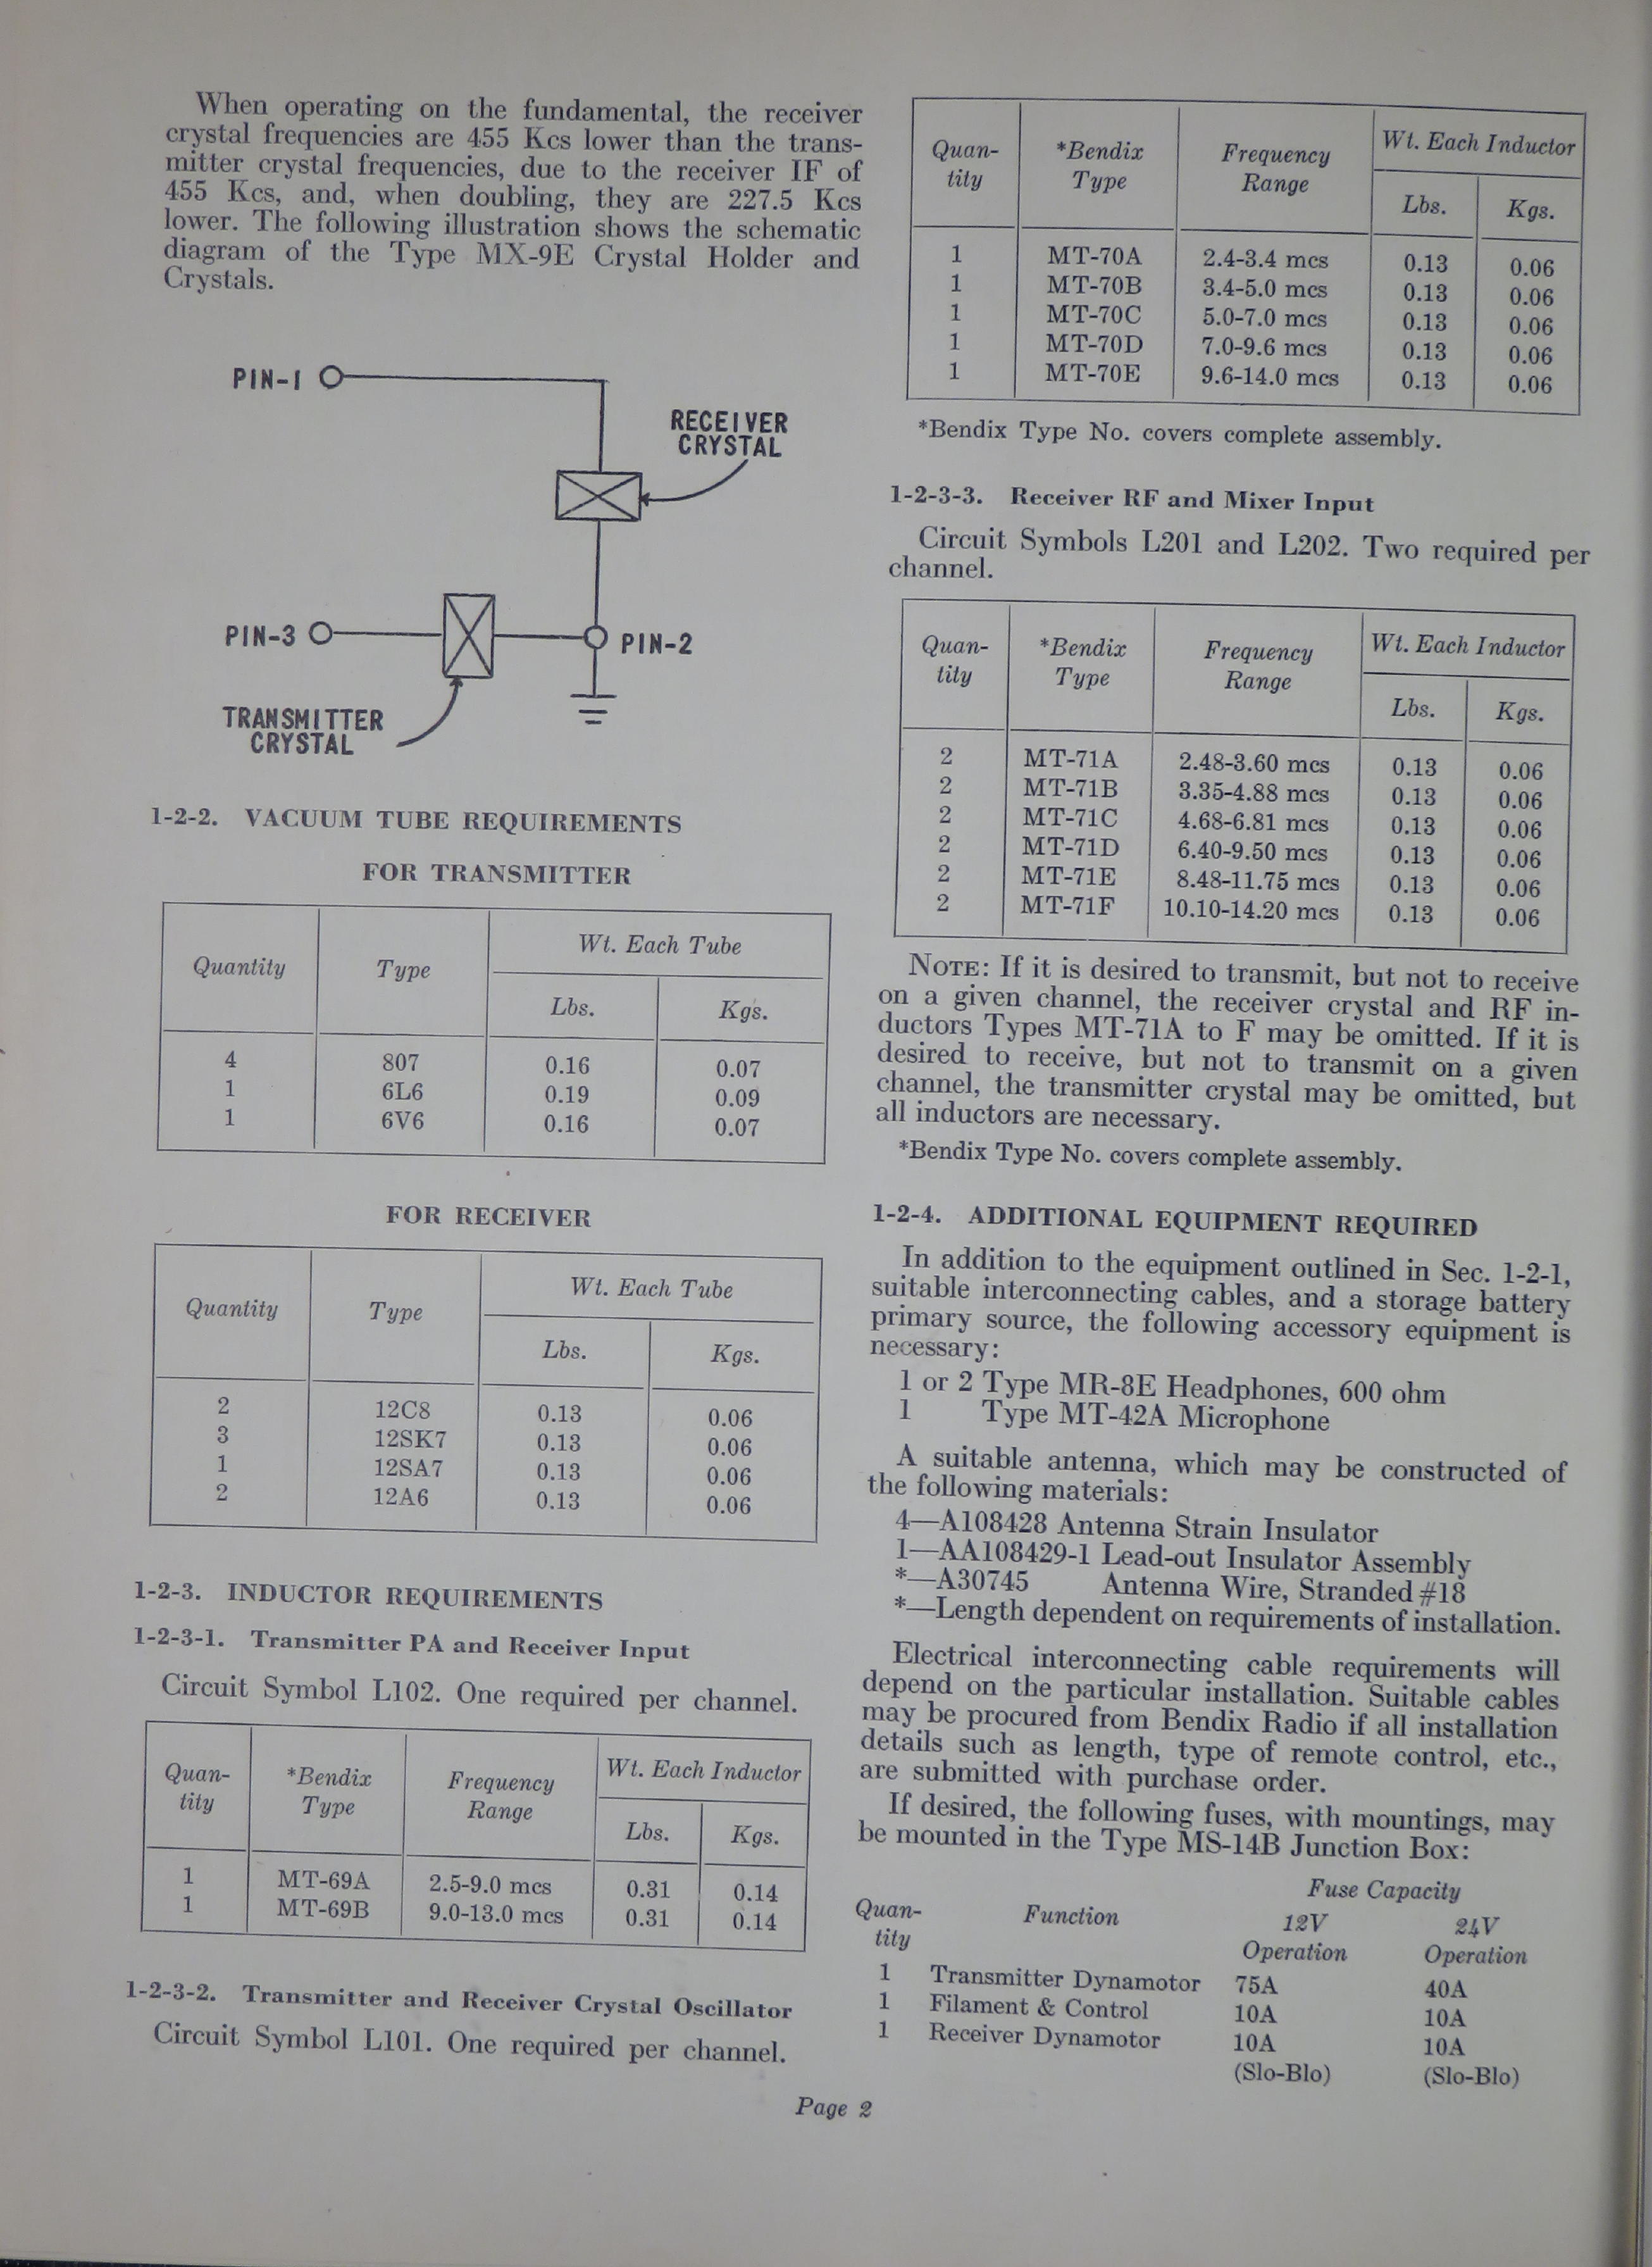 Sample page 8 from AirCorps Library document: Instruction Book for Model RTA-1B Communication Equipment